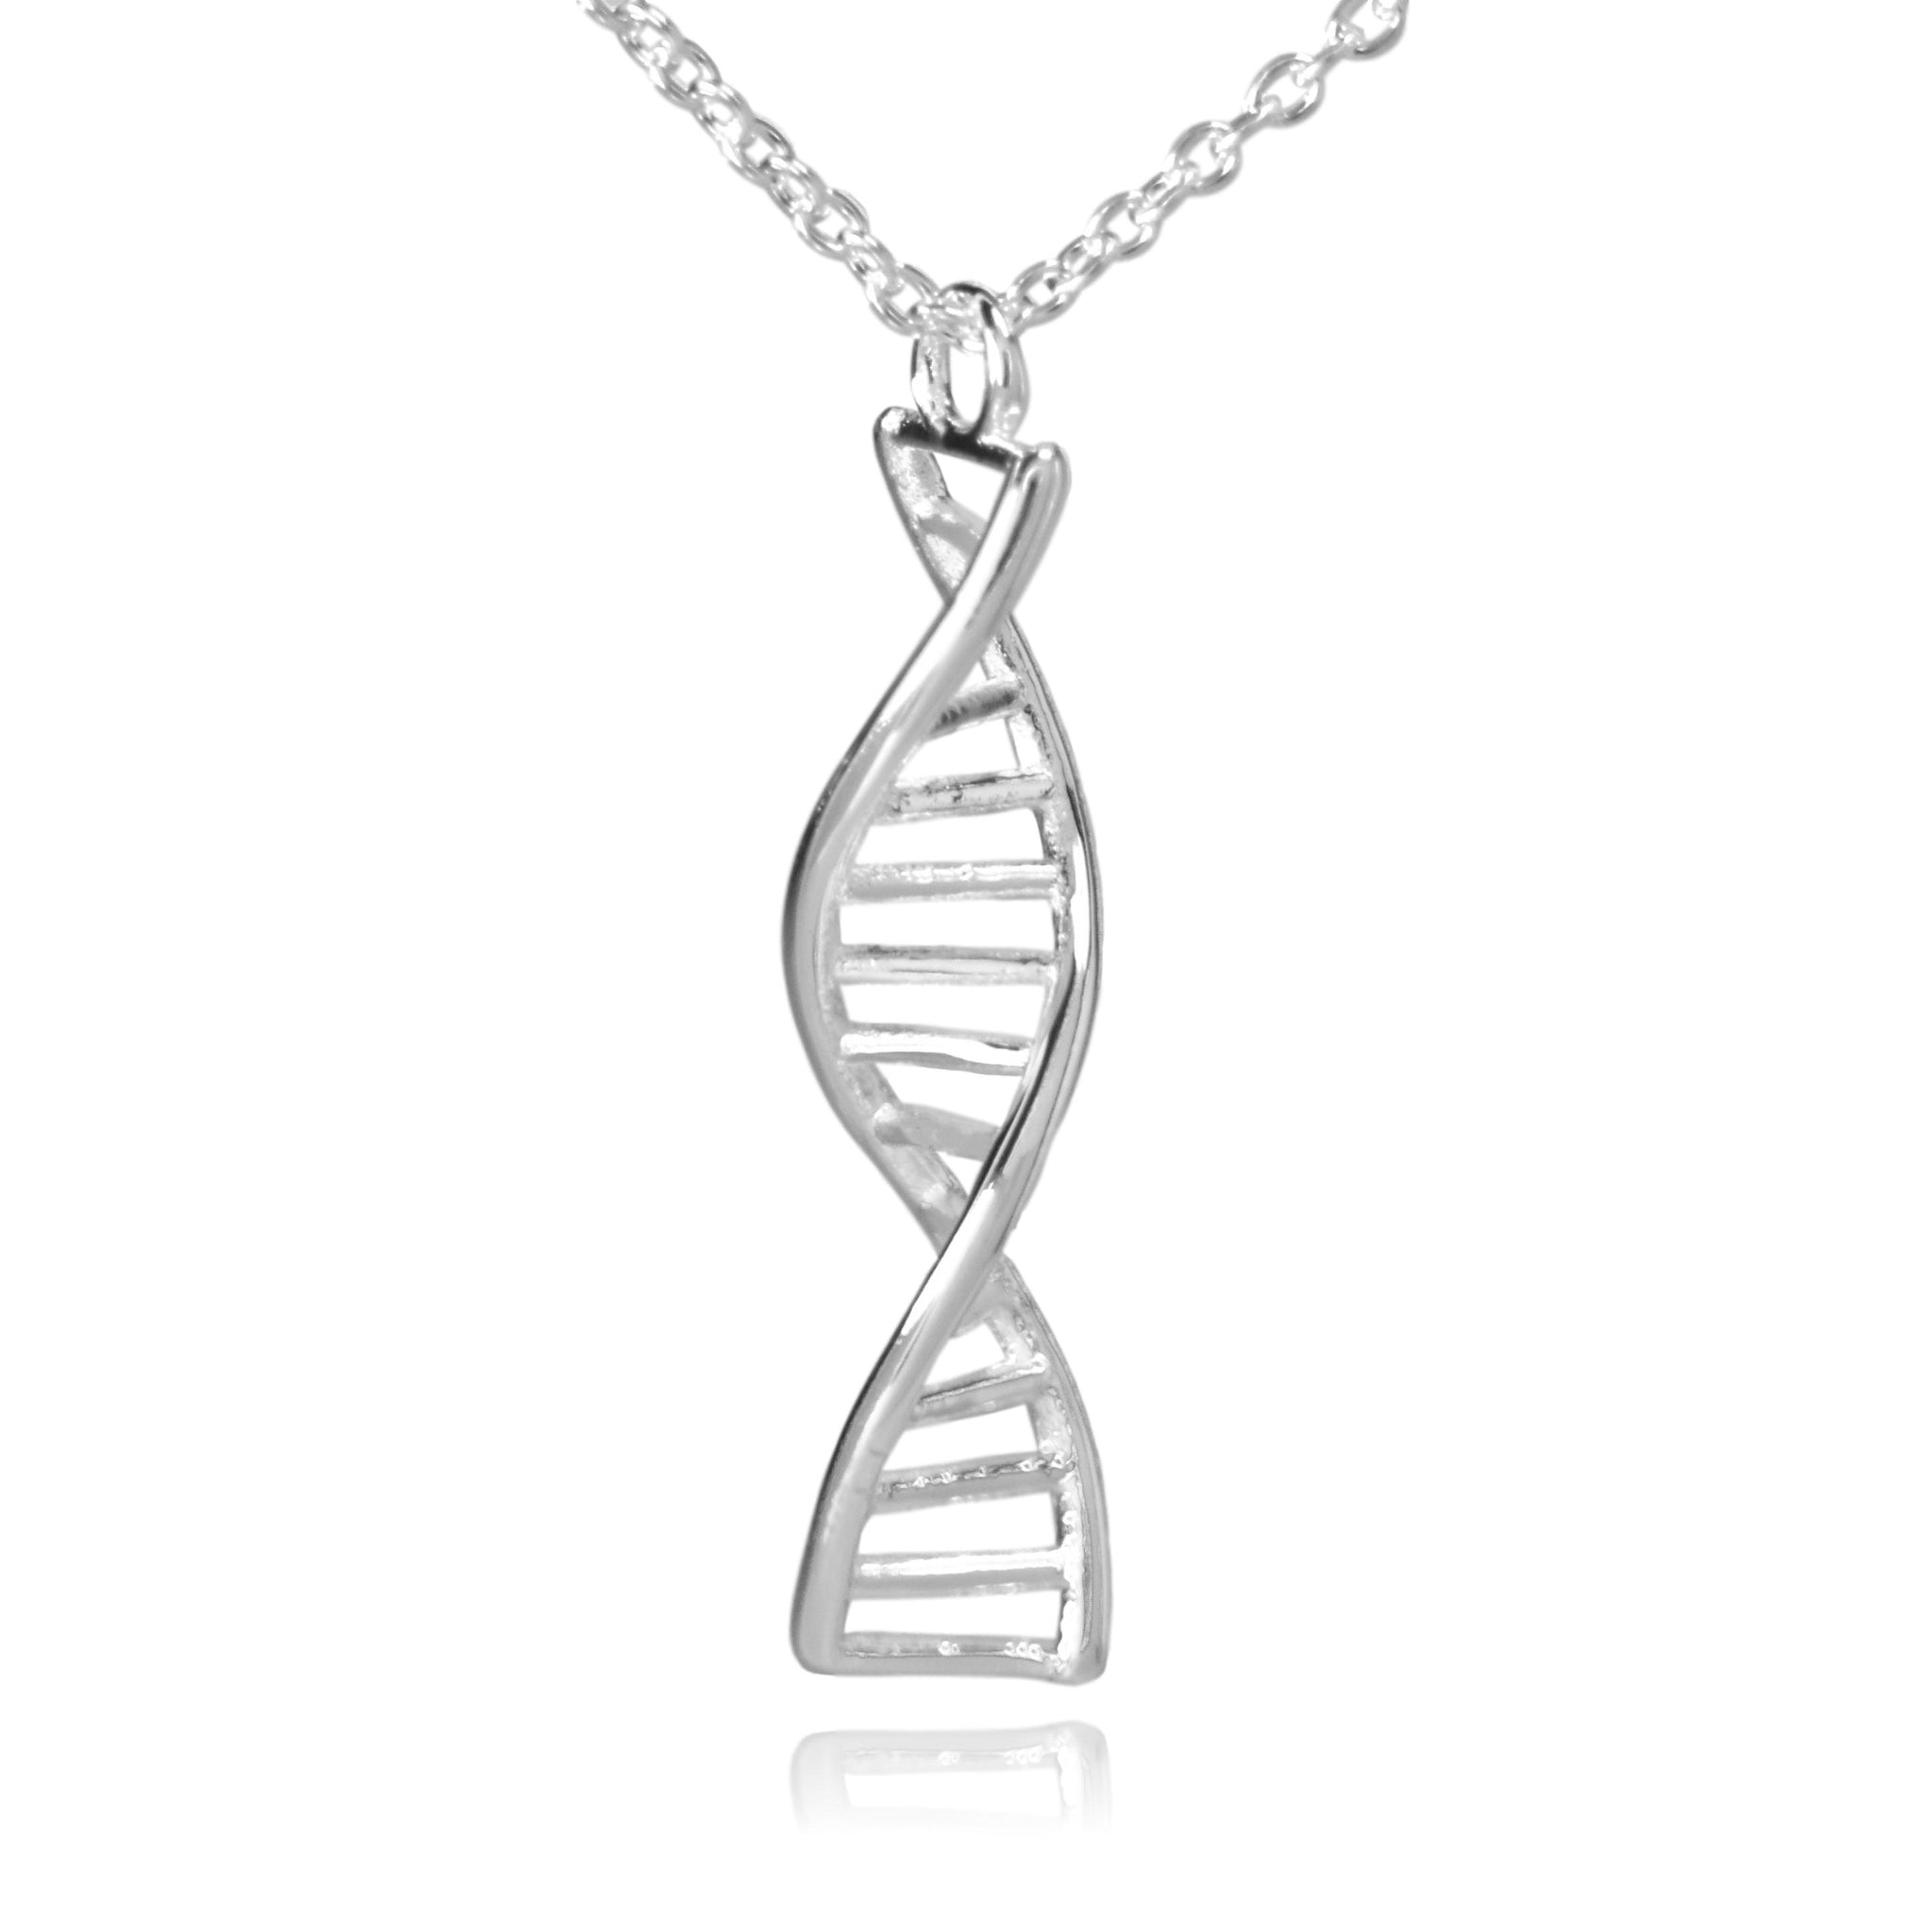 Silver Stainless Steel DNA Double Helix Necklace